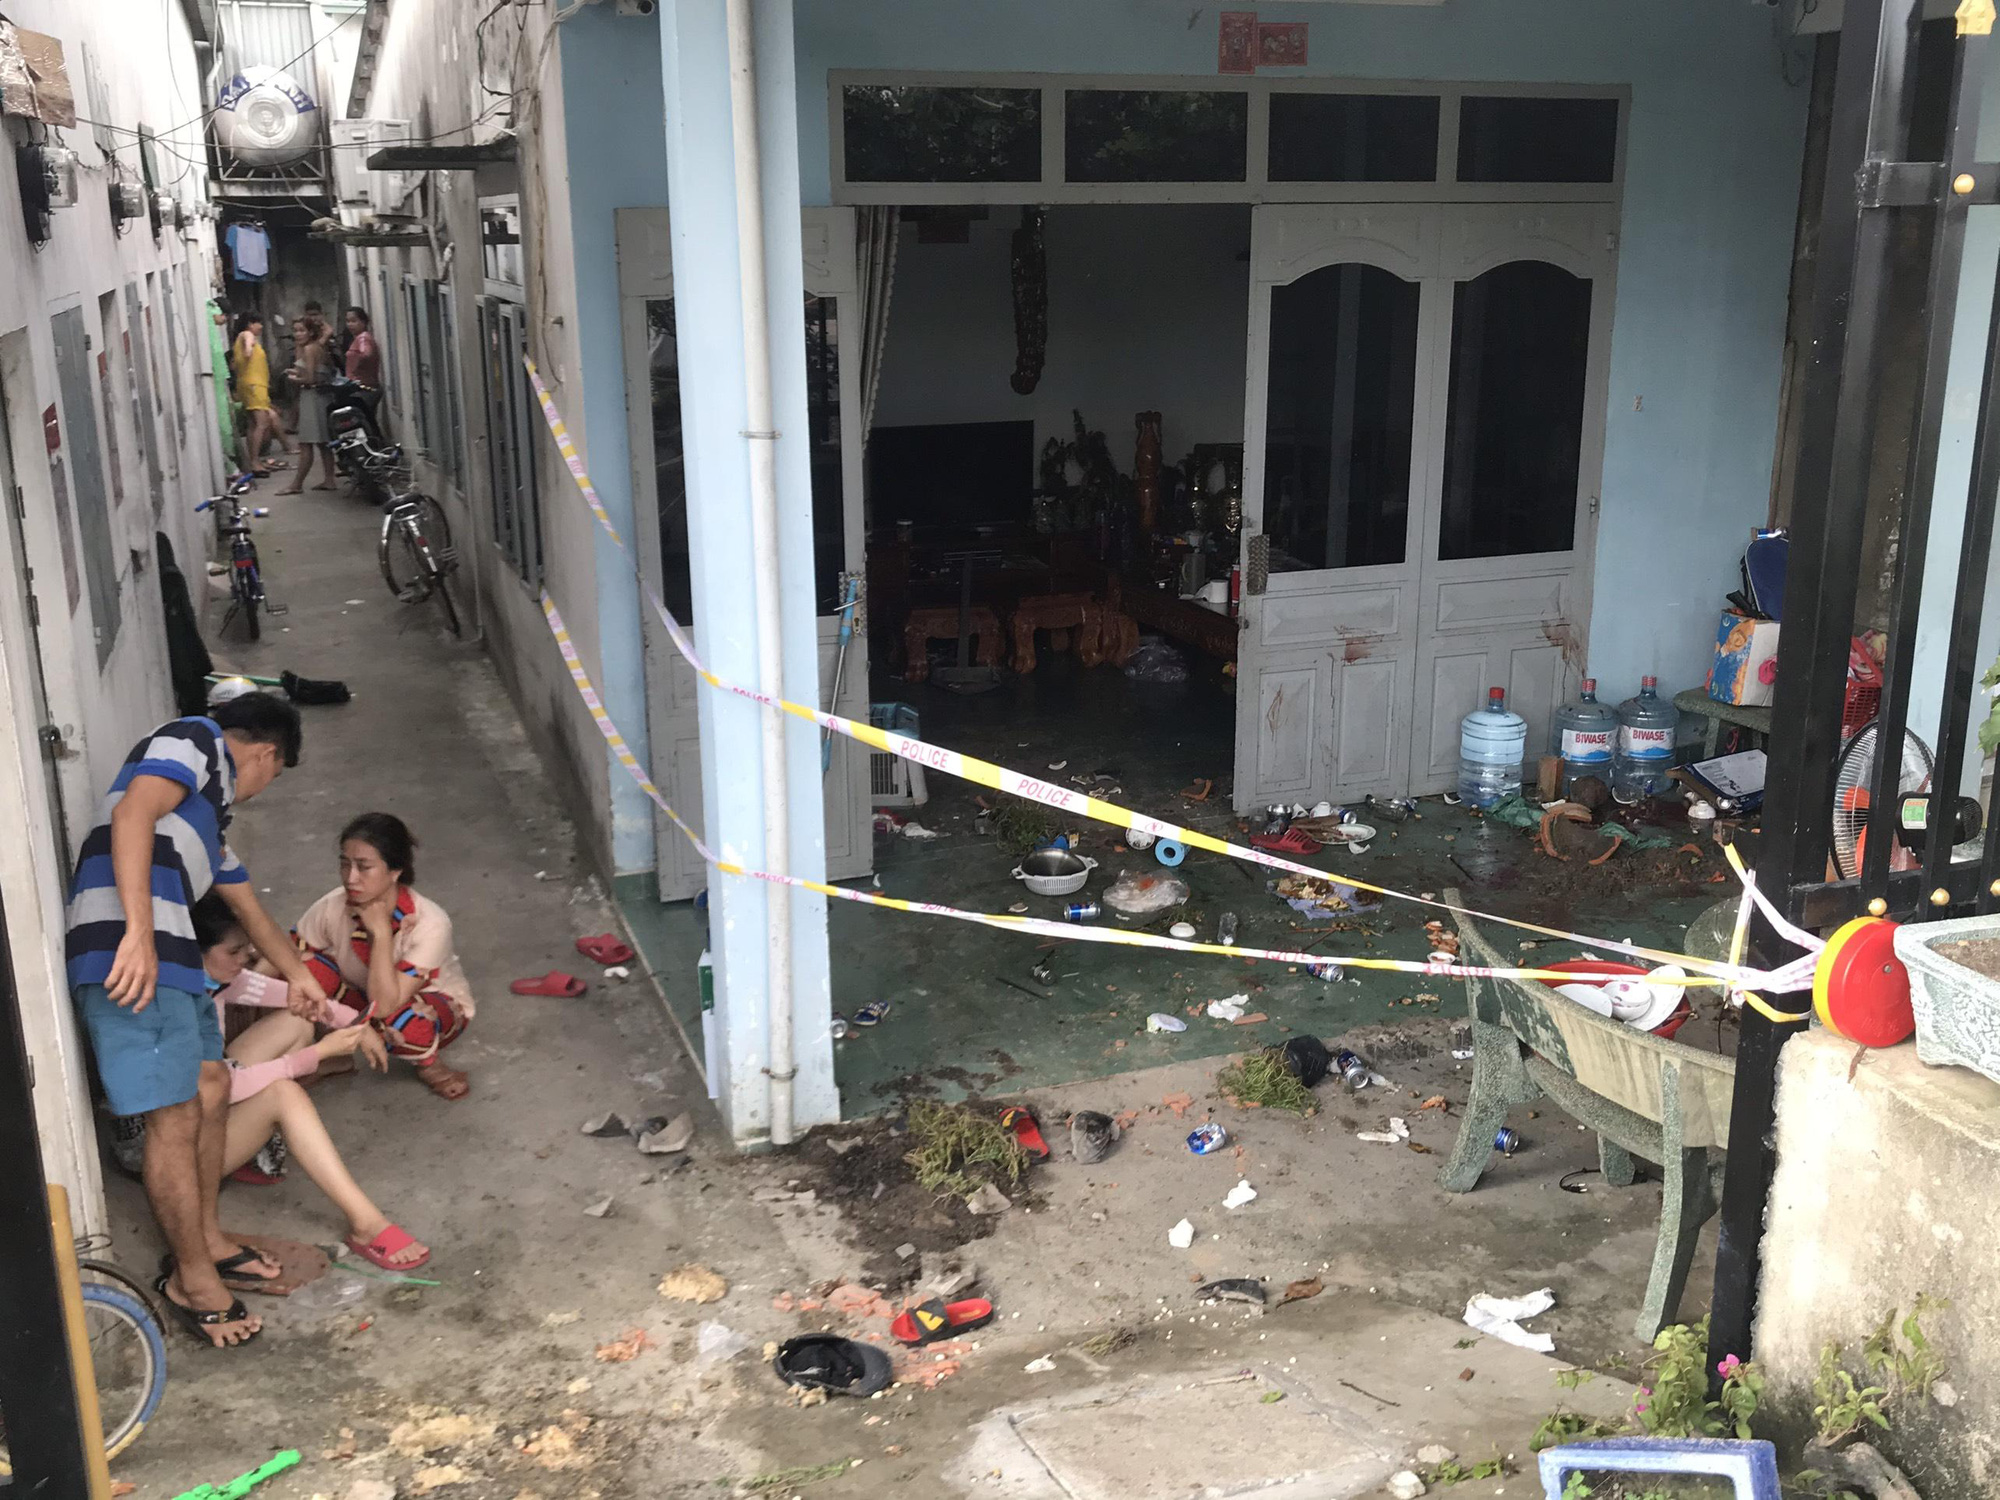 The house where a man and his adolescent daughter were attacked by a group of bikers in Thuan An City, Binh Duong Province, Vietnam is sealed off for scene investigation, September 2, 2020. Photo: Tuan Duy / Tuoi Tre